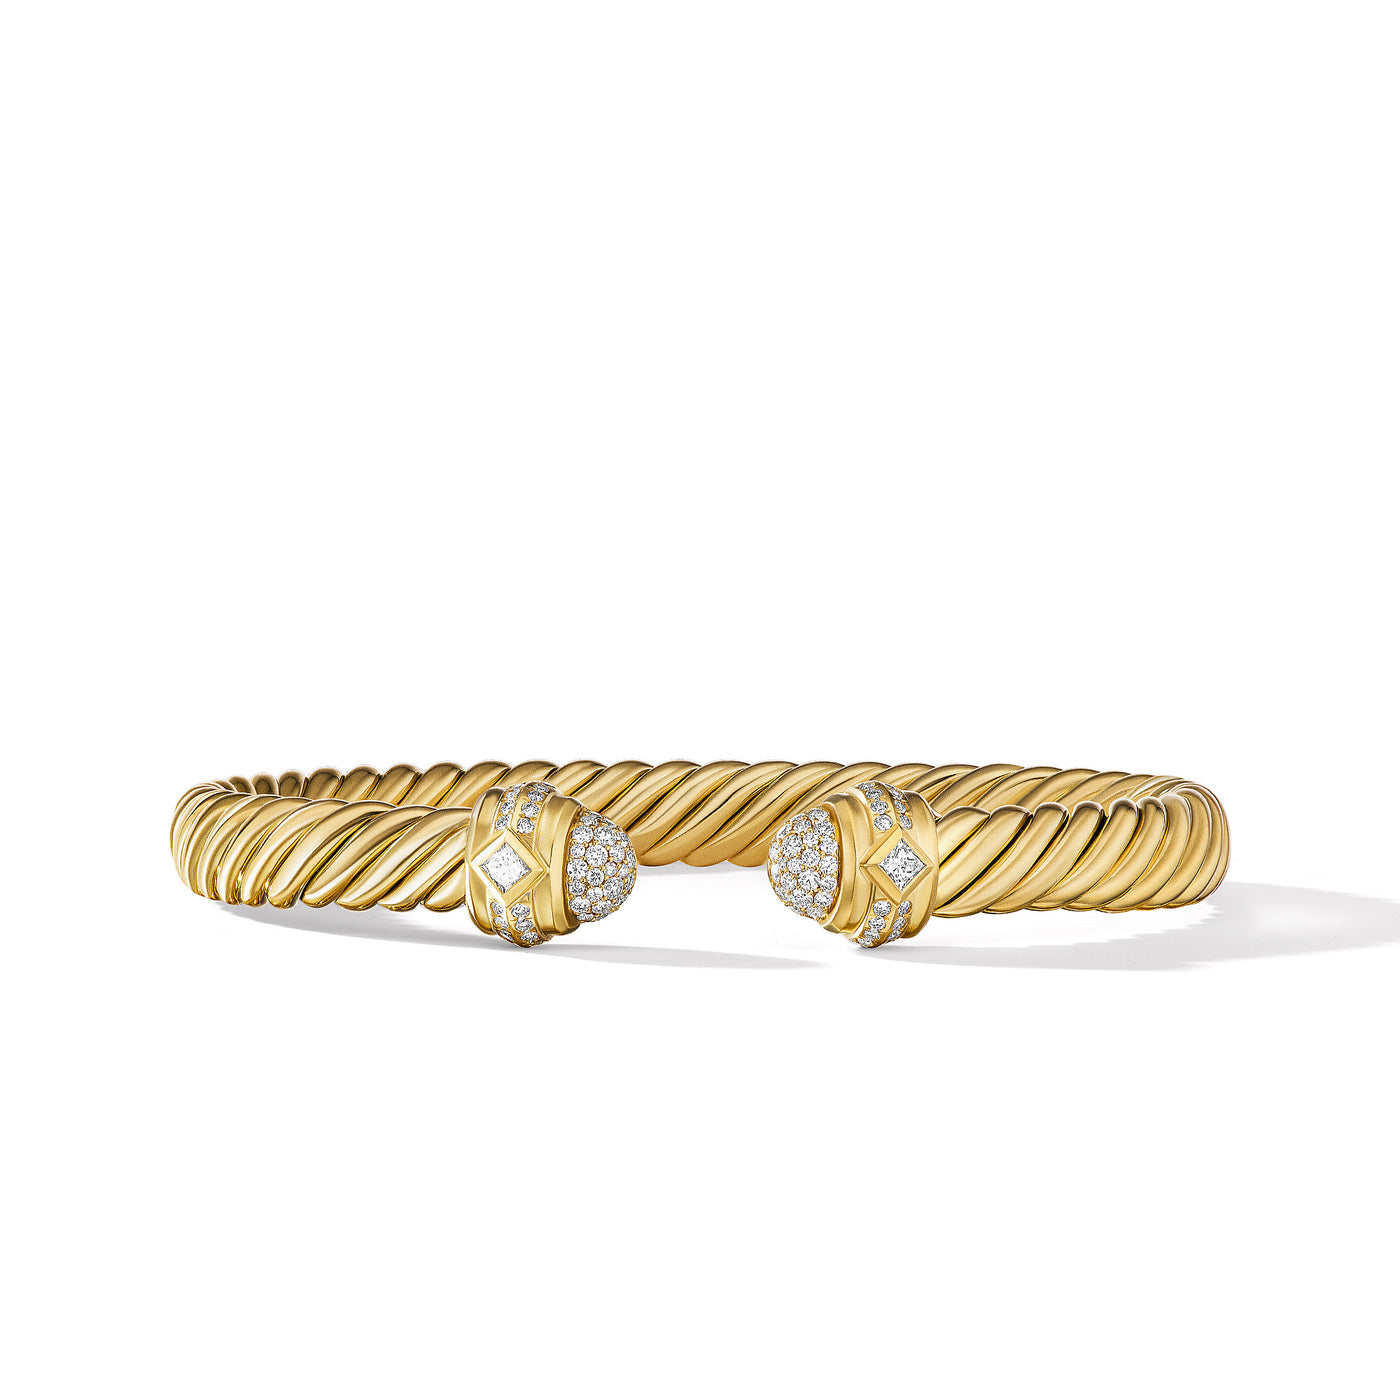 Renaissance® Oval Cablespira Bracelet in 18K Yellow Gold with Diamonds\, 7mm